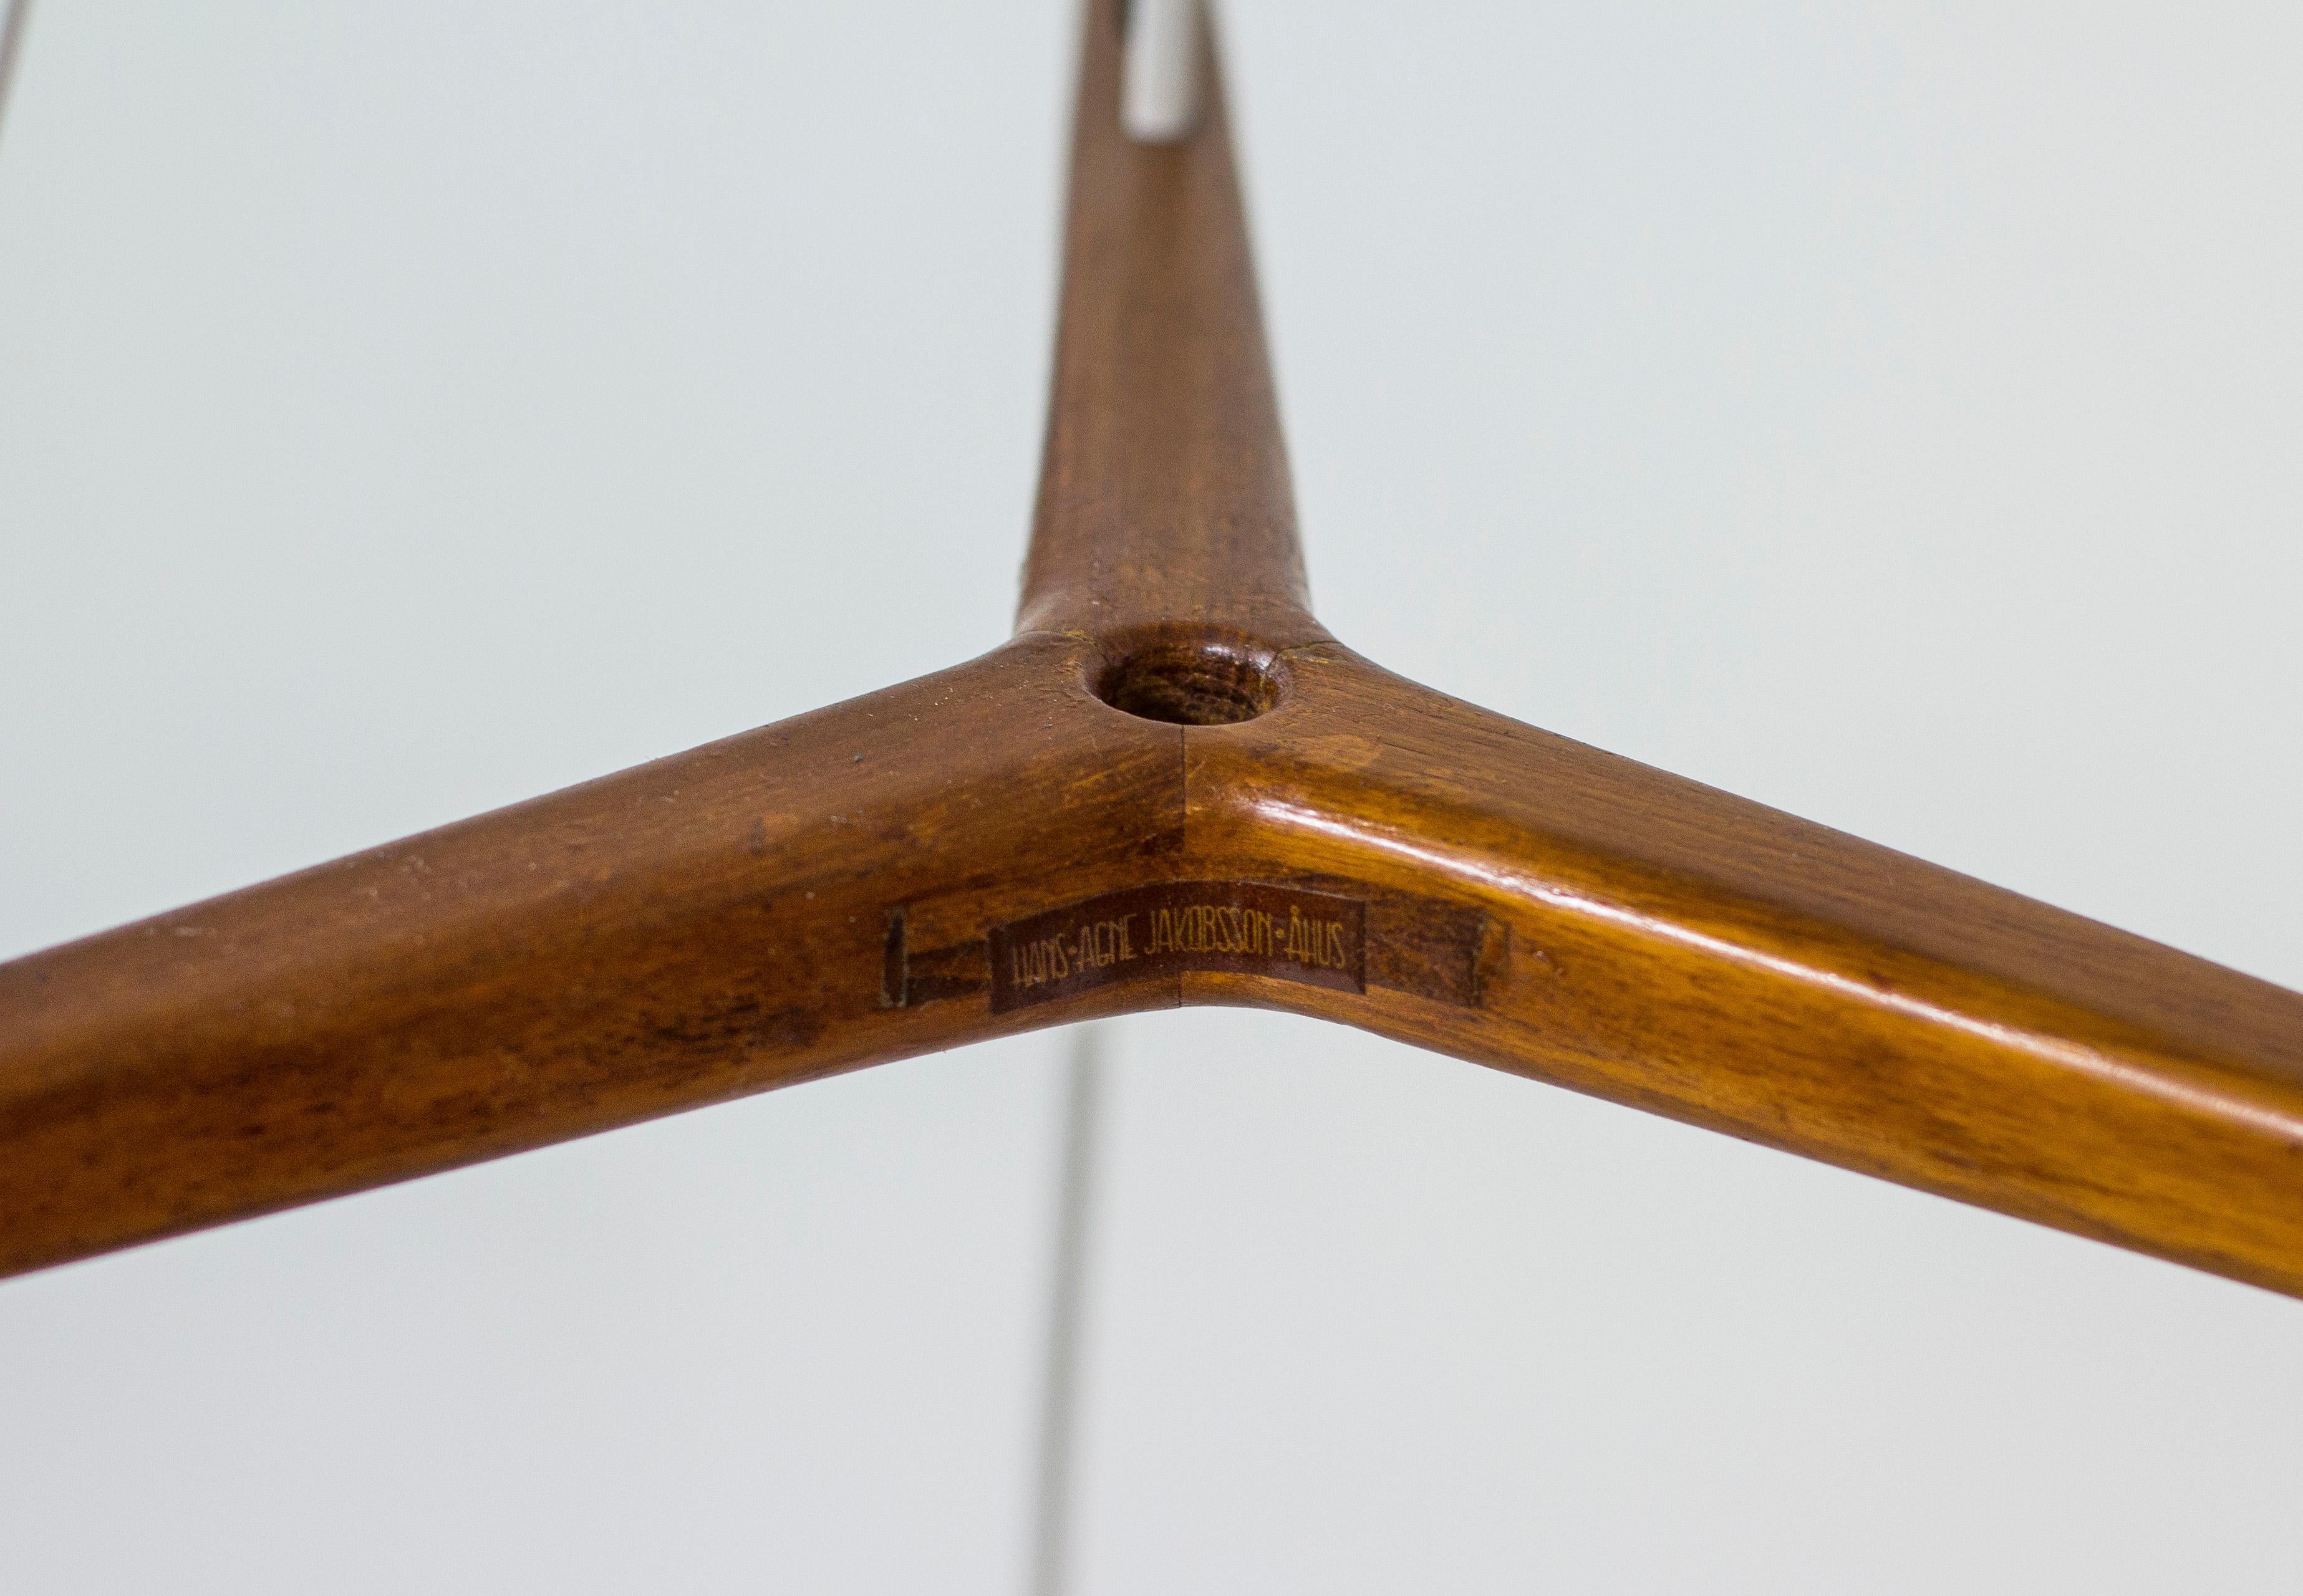 Tripple pendant lamp designed by Hans-Agne Jakobsson. Produced by his own company in Åhus during the 1950s. Three solid brass shades and ceiling mount with teak details and solid teak triangle that separate the shades. Signed with label. Good